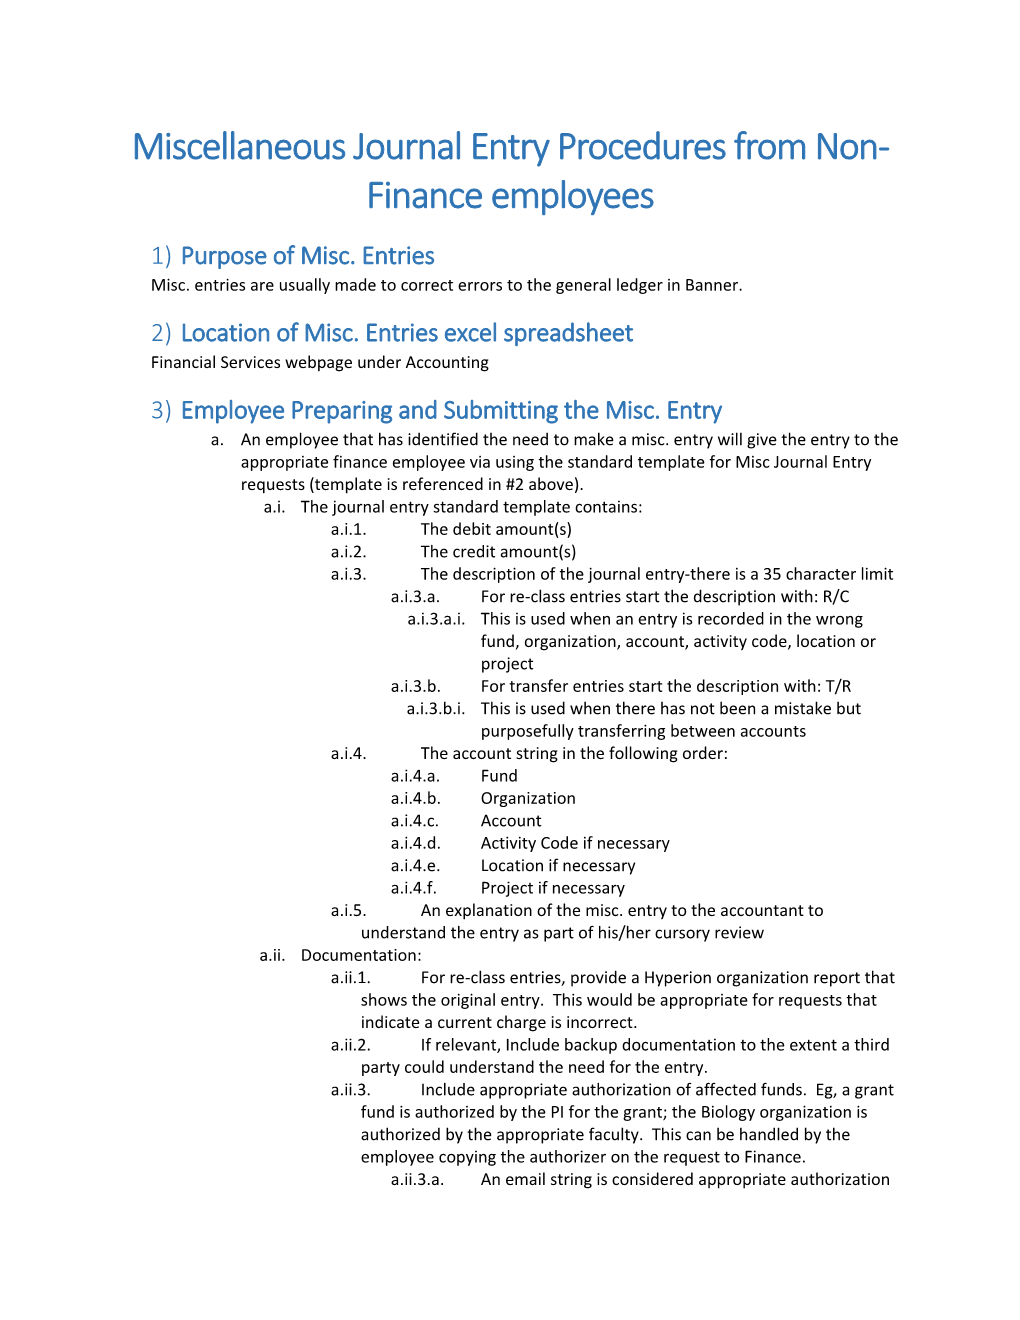 Miscellaneous Journal Entry Procedures from Non-Finance Employees